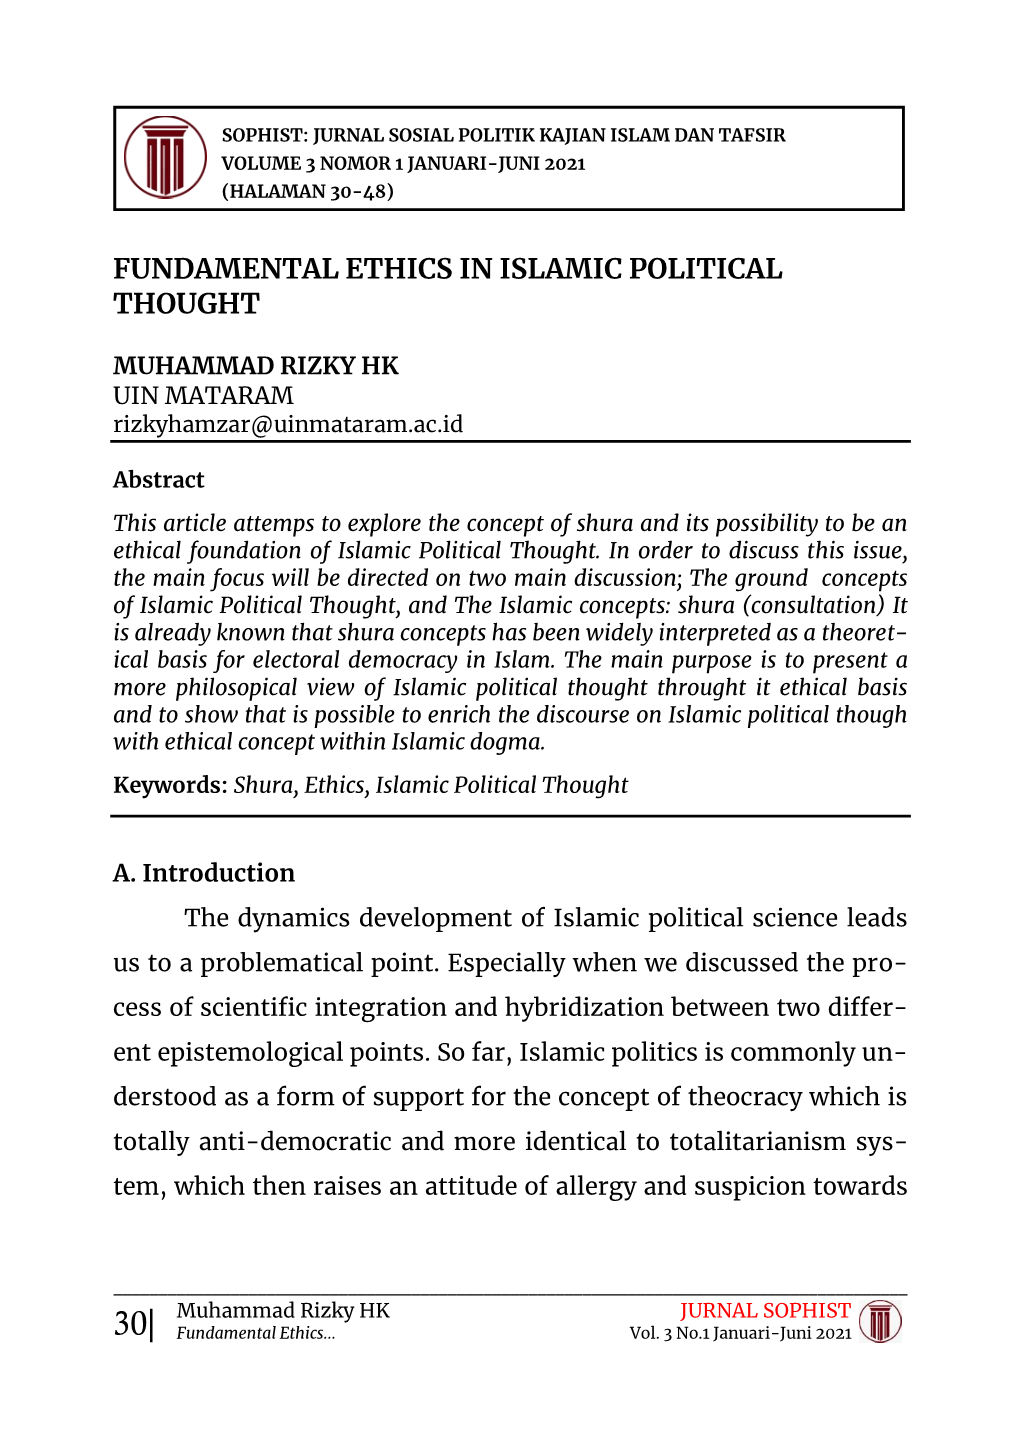 Fundamental Ethics in Islamic Political Thought